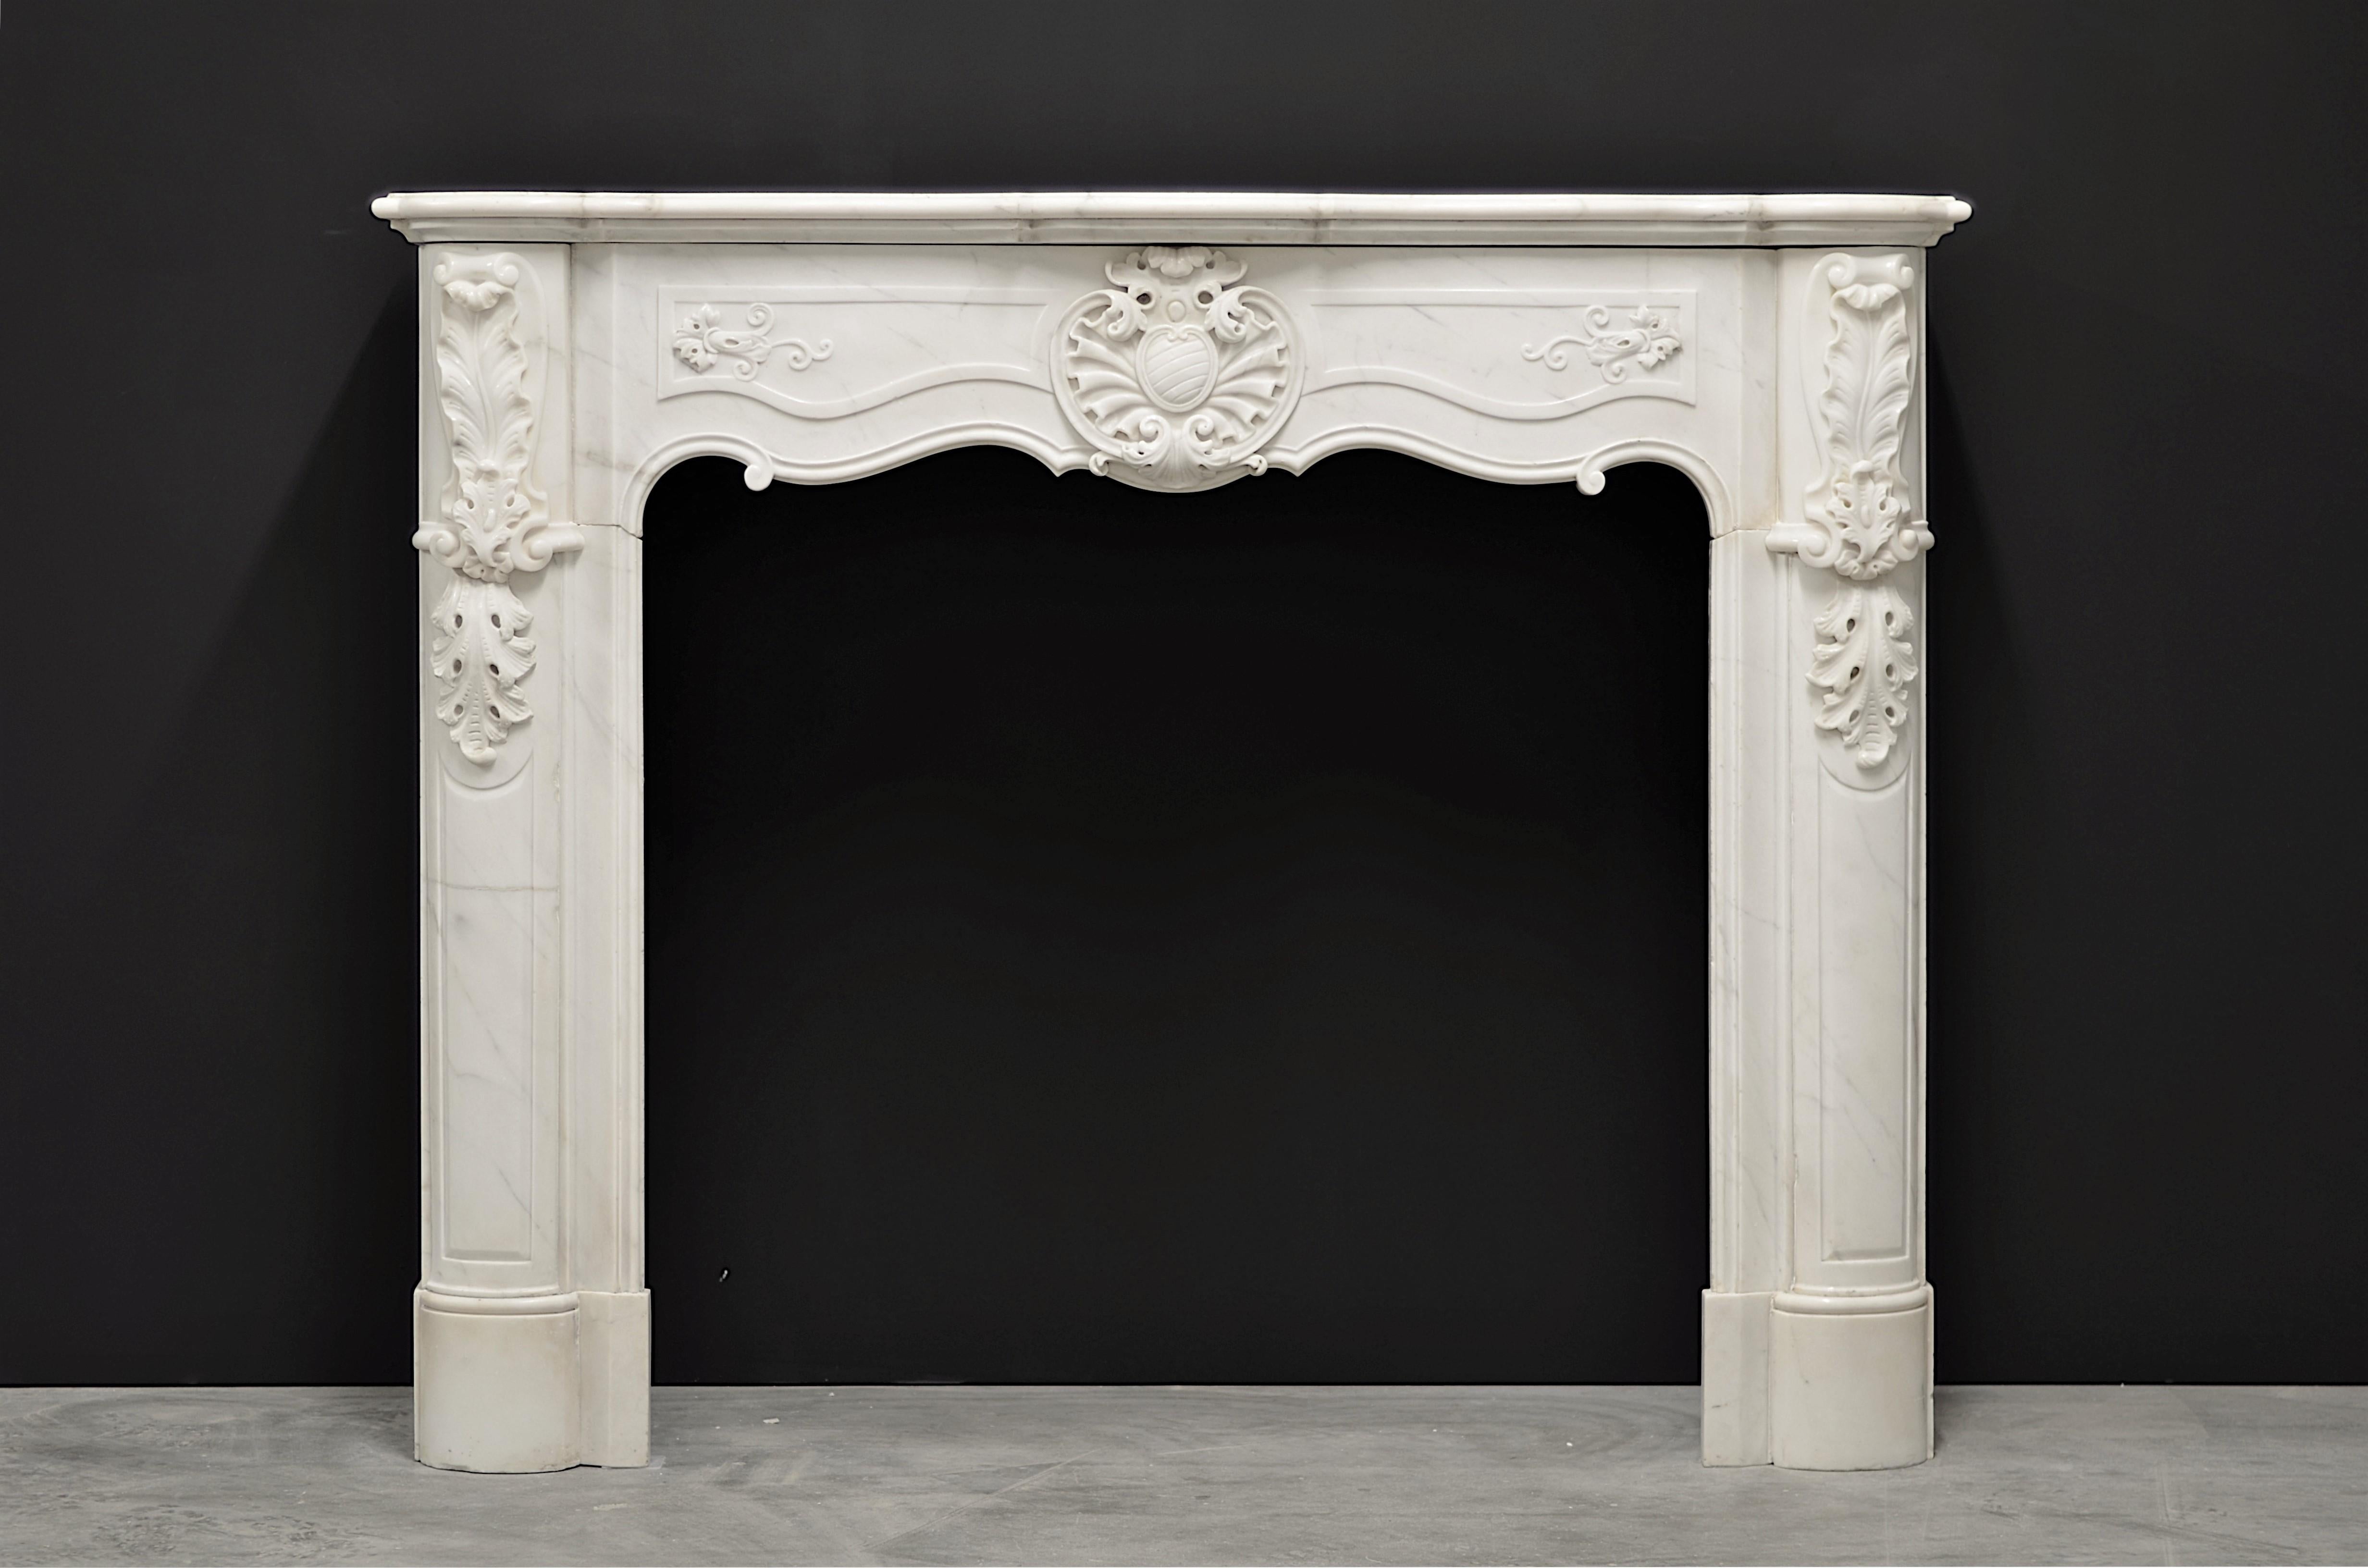 Beautiful and surprising 19th century French Louis XV Rococo style fireplace mantel in white marble.

The perfect dimensions and decorations truly make this mantel stand out.

Lovely swooping and profiled topshelf above a well decorated frieze,